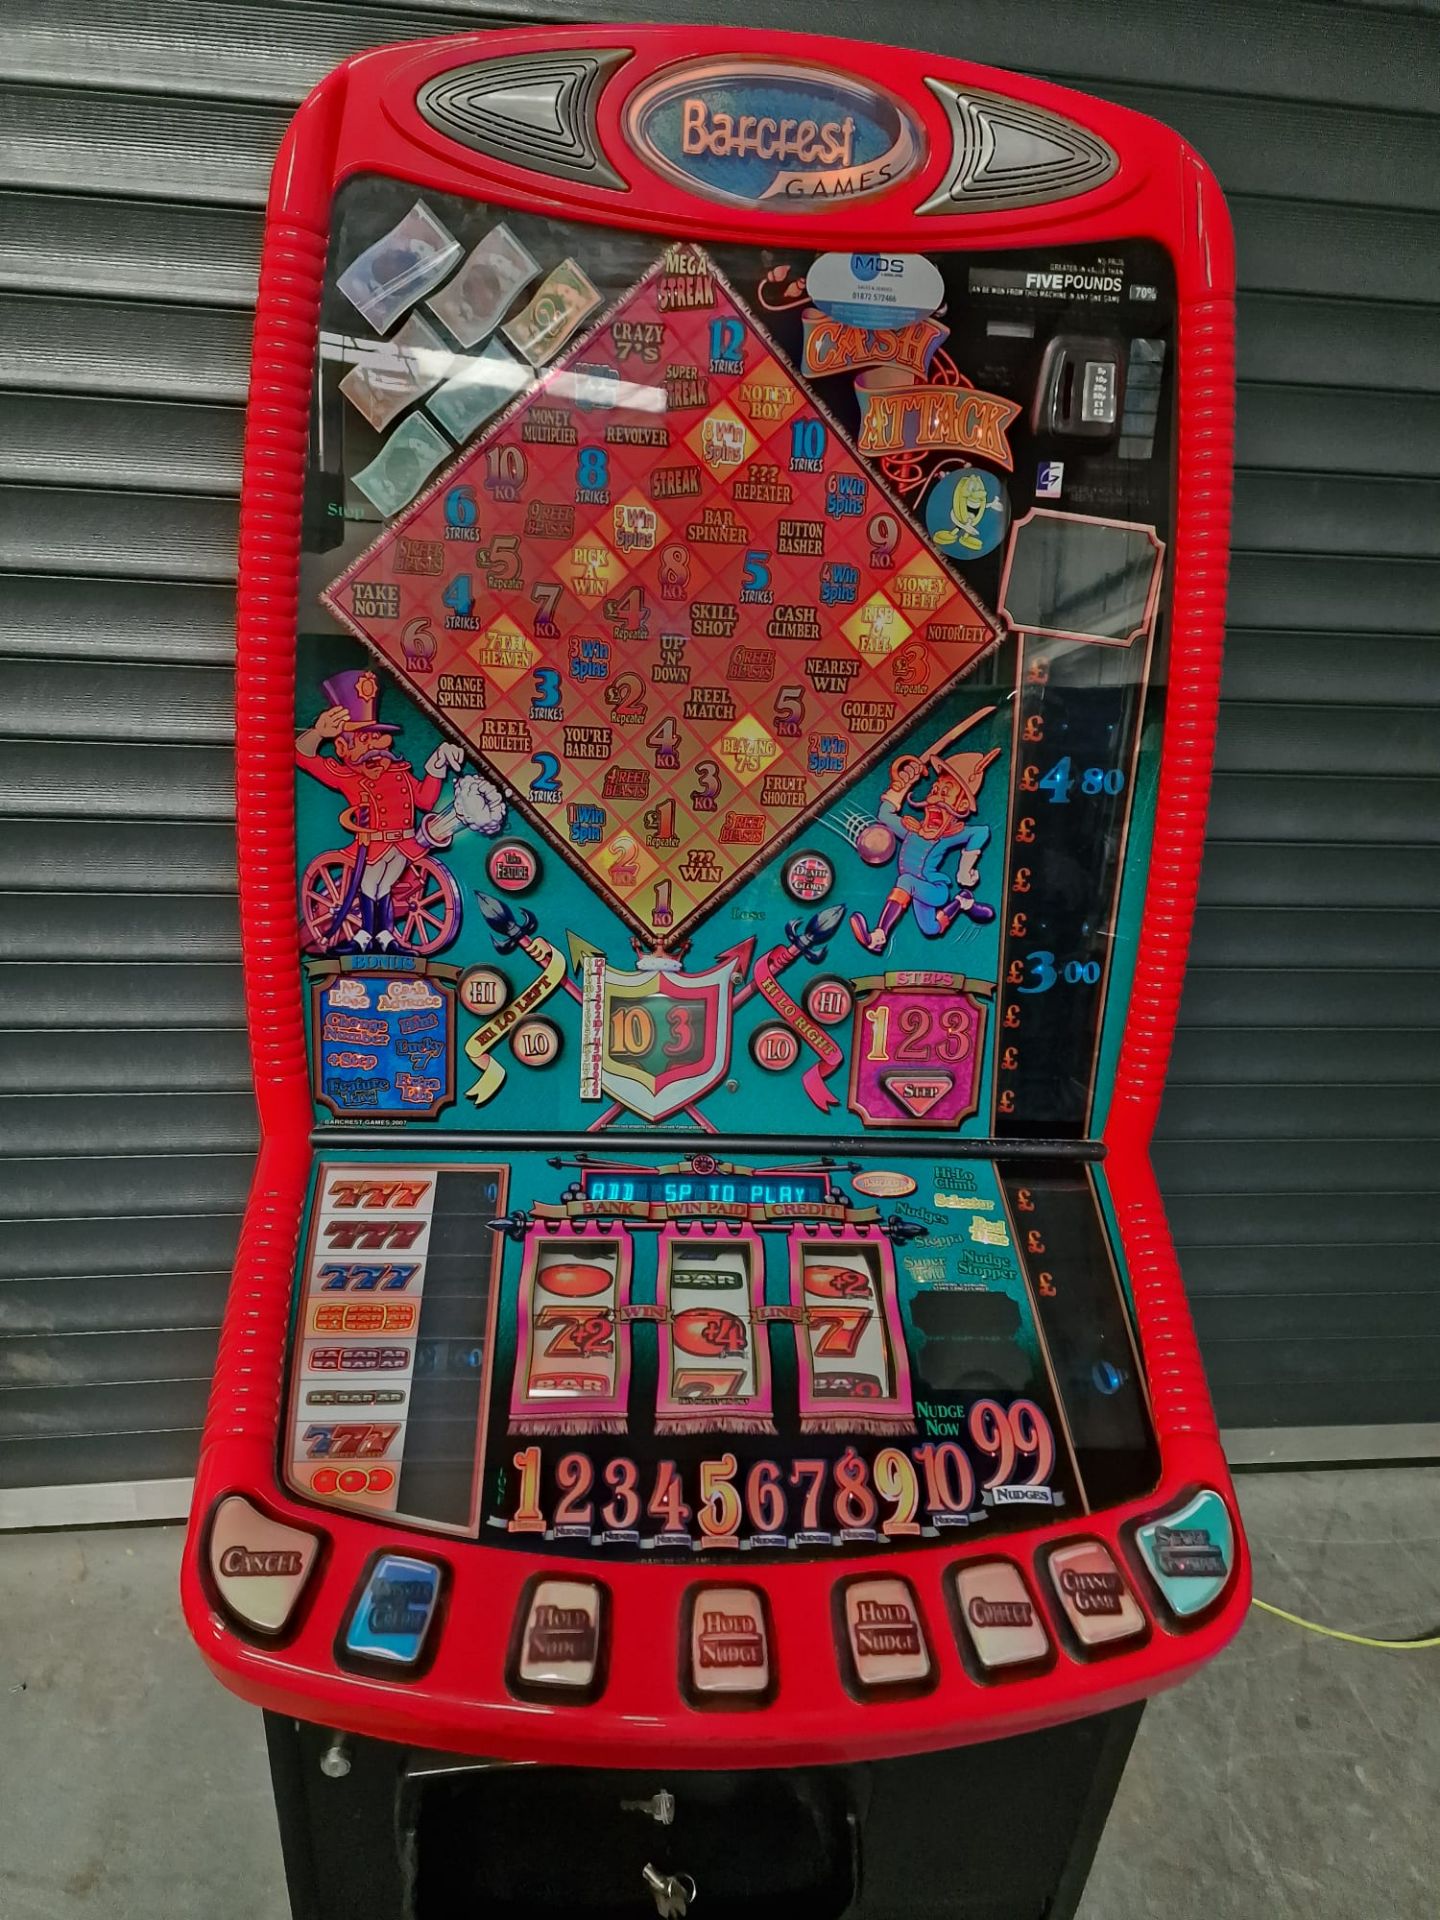 Gaming machine Cash attack pub fruitmachine10p play and 5 jack pot coin operated